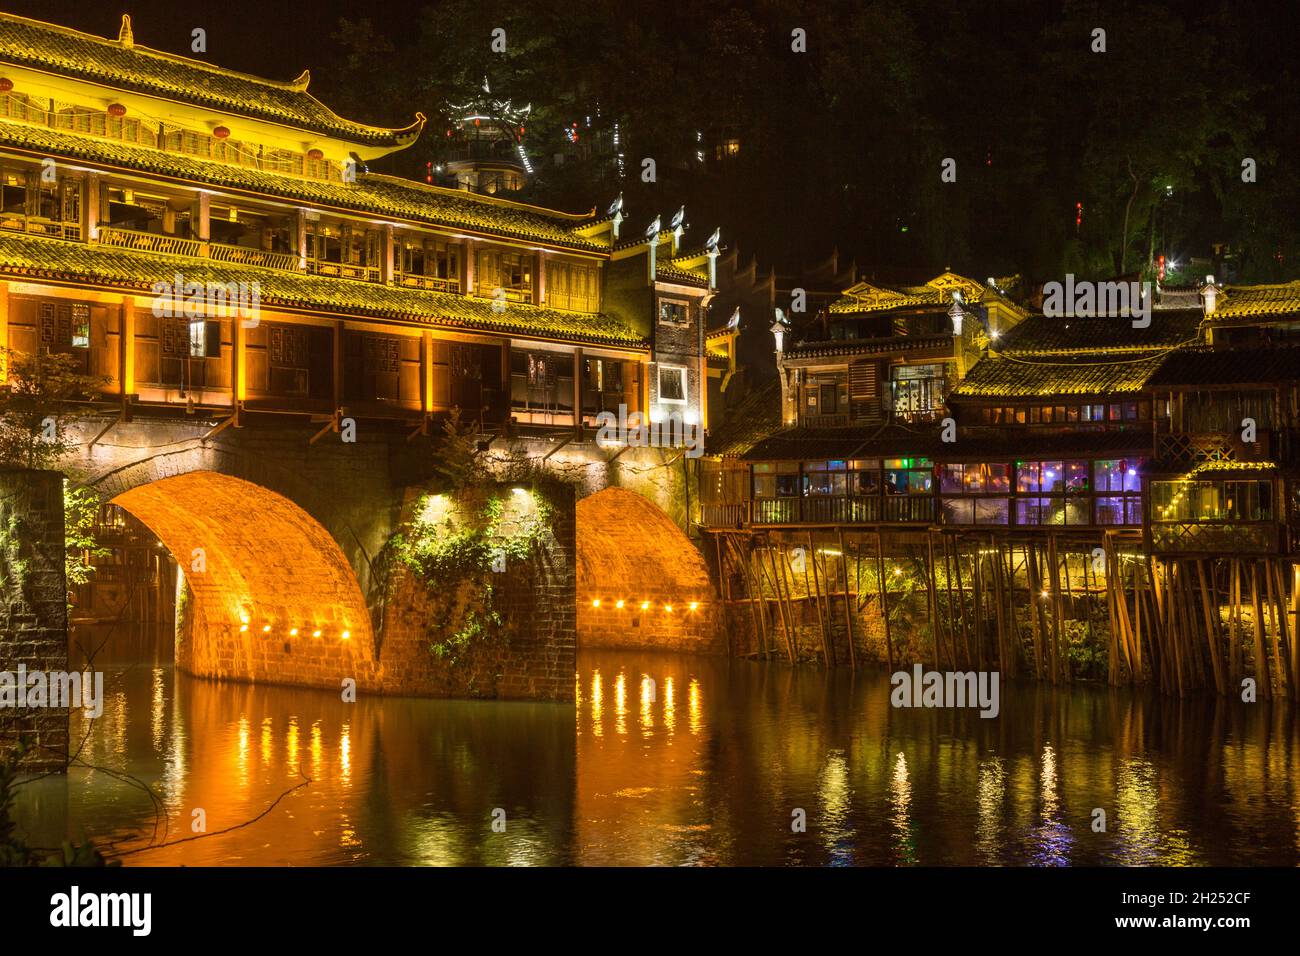 Diaojiao-style buildings on stilts next to the Phoenix Hong Bridge at night.  Fenghuang, China. Stock Photo